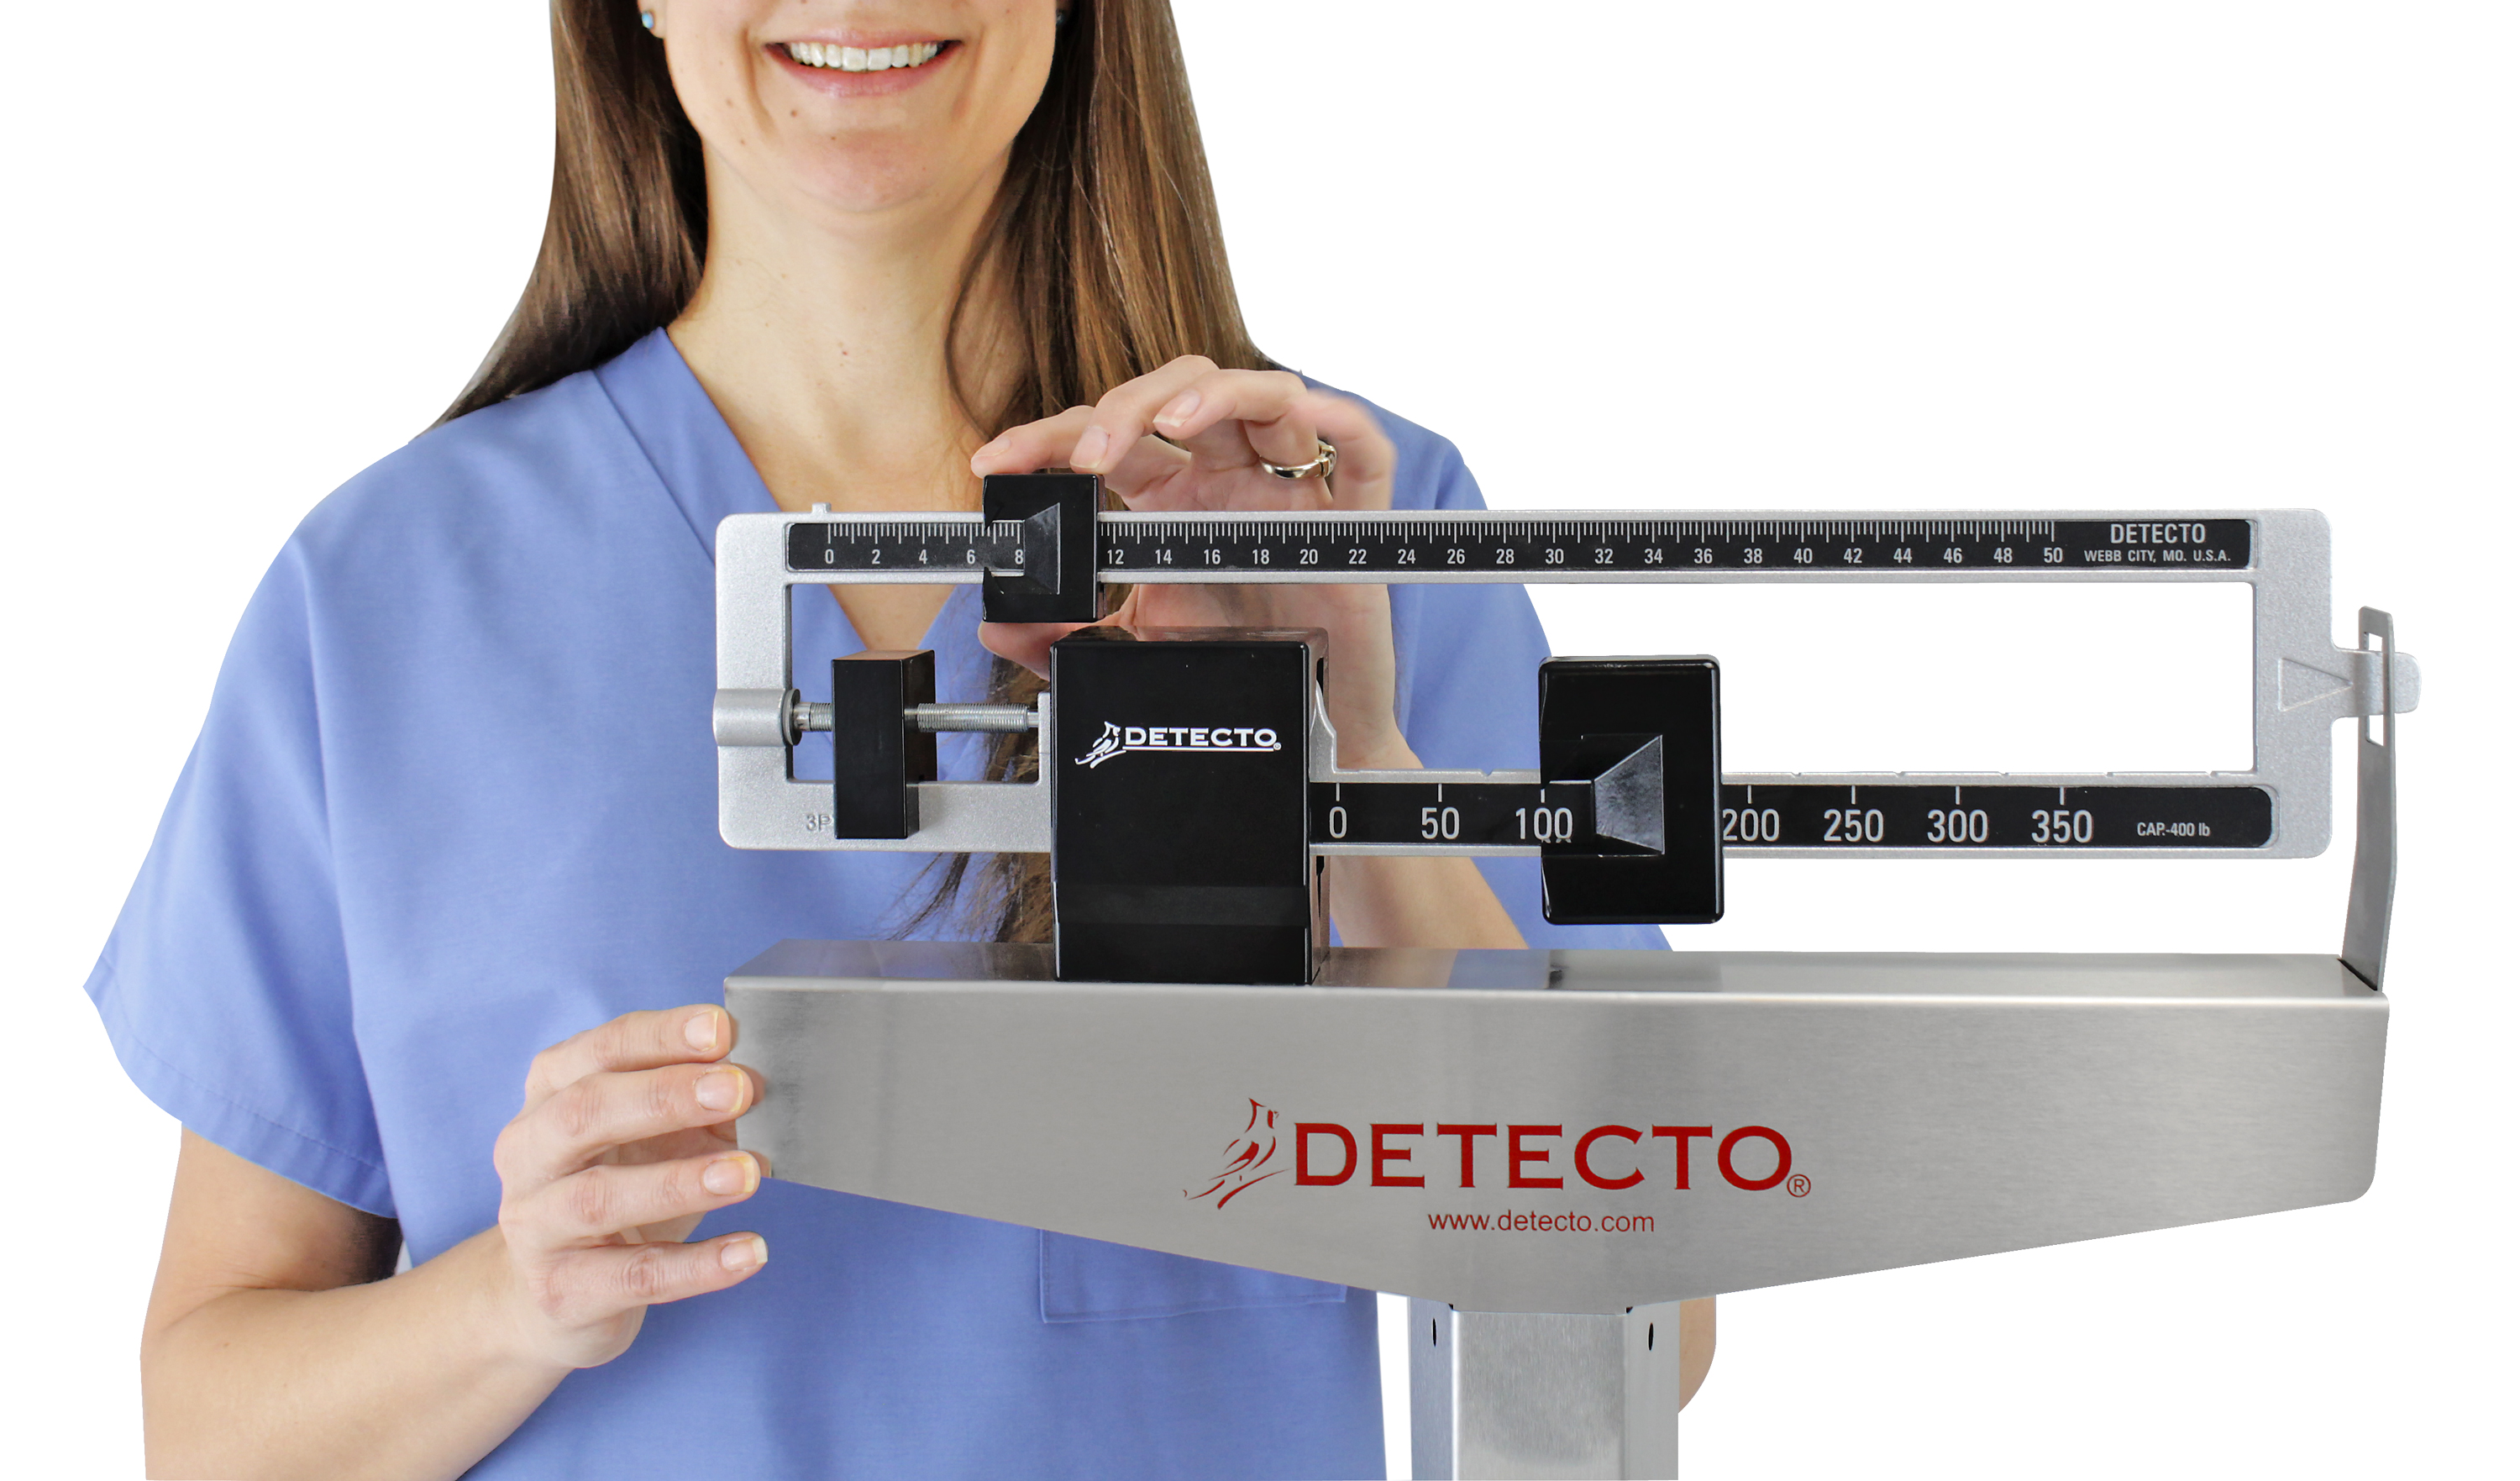 Eye-Level Mechanical Beam Physician Scale with Height Rod (KILOS)